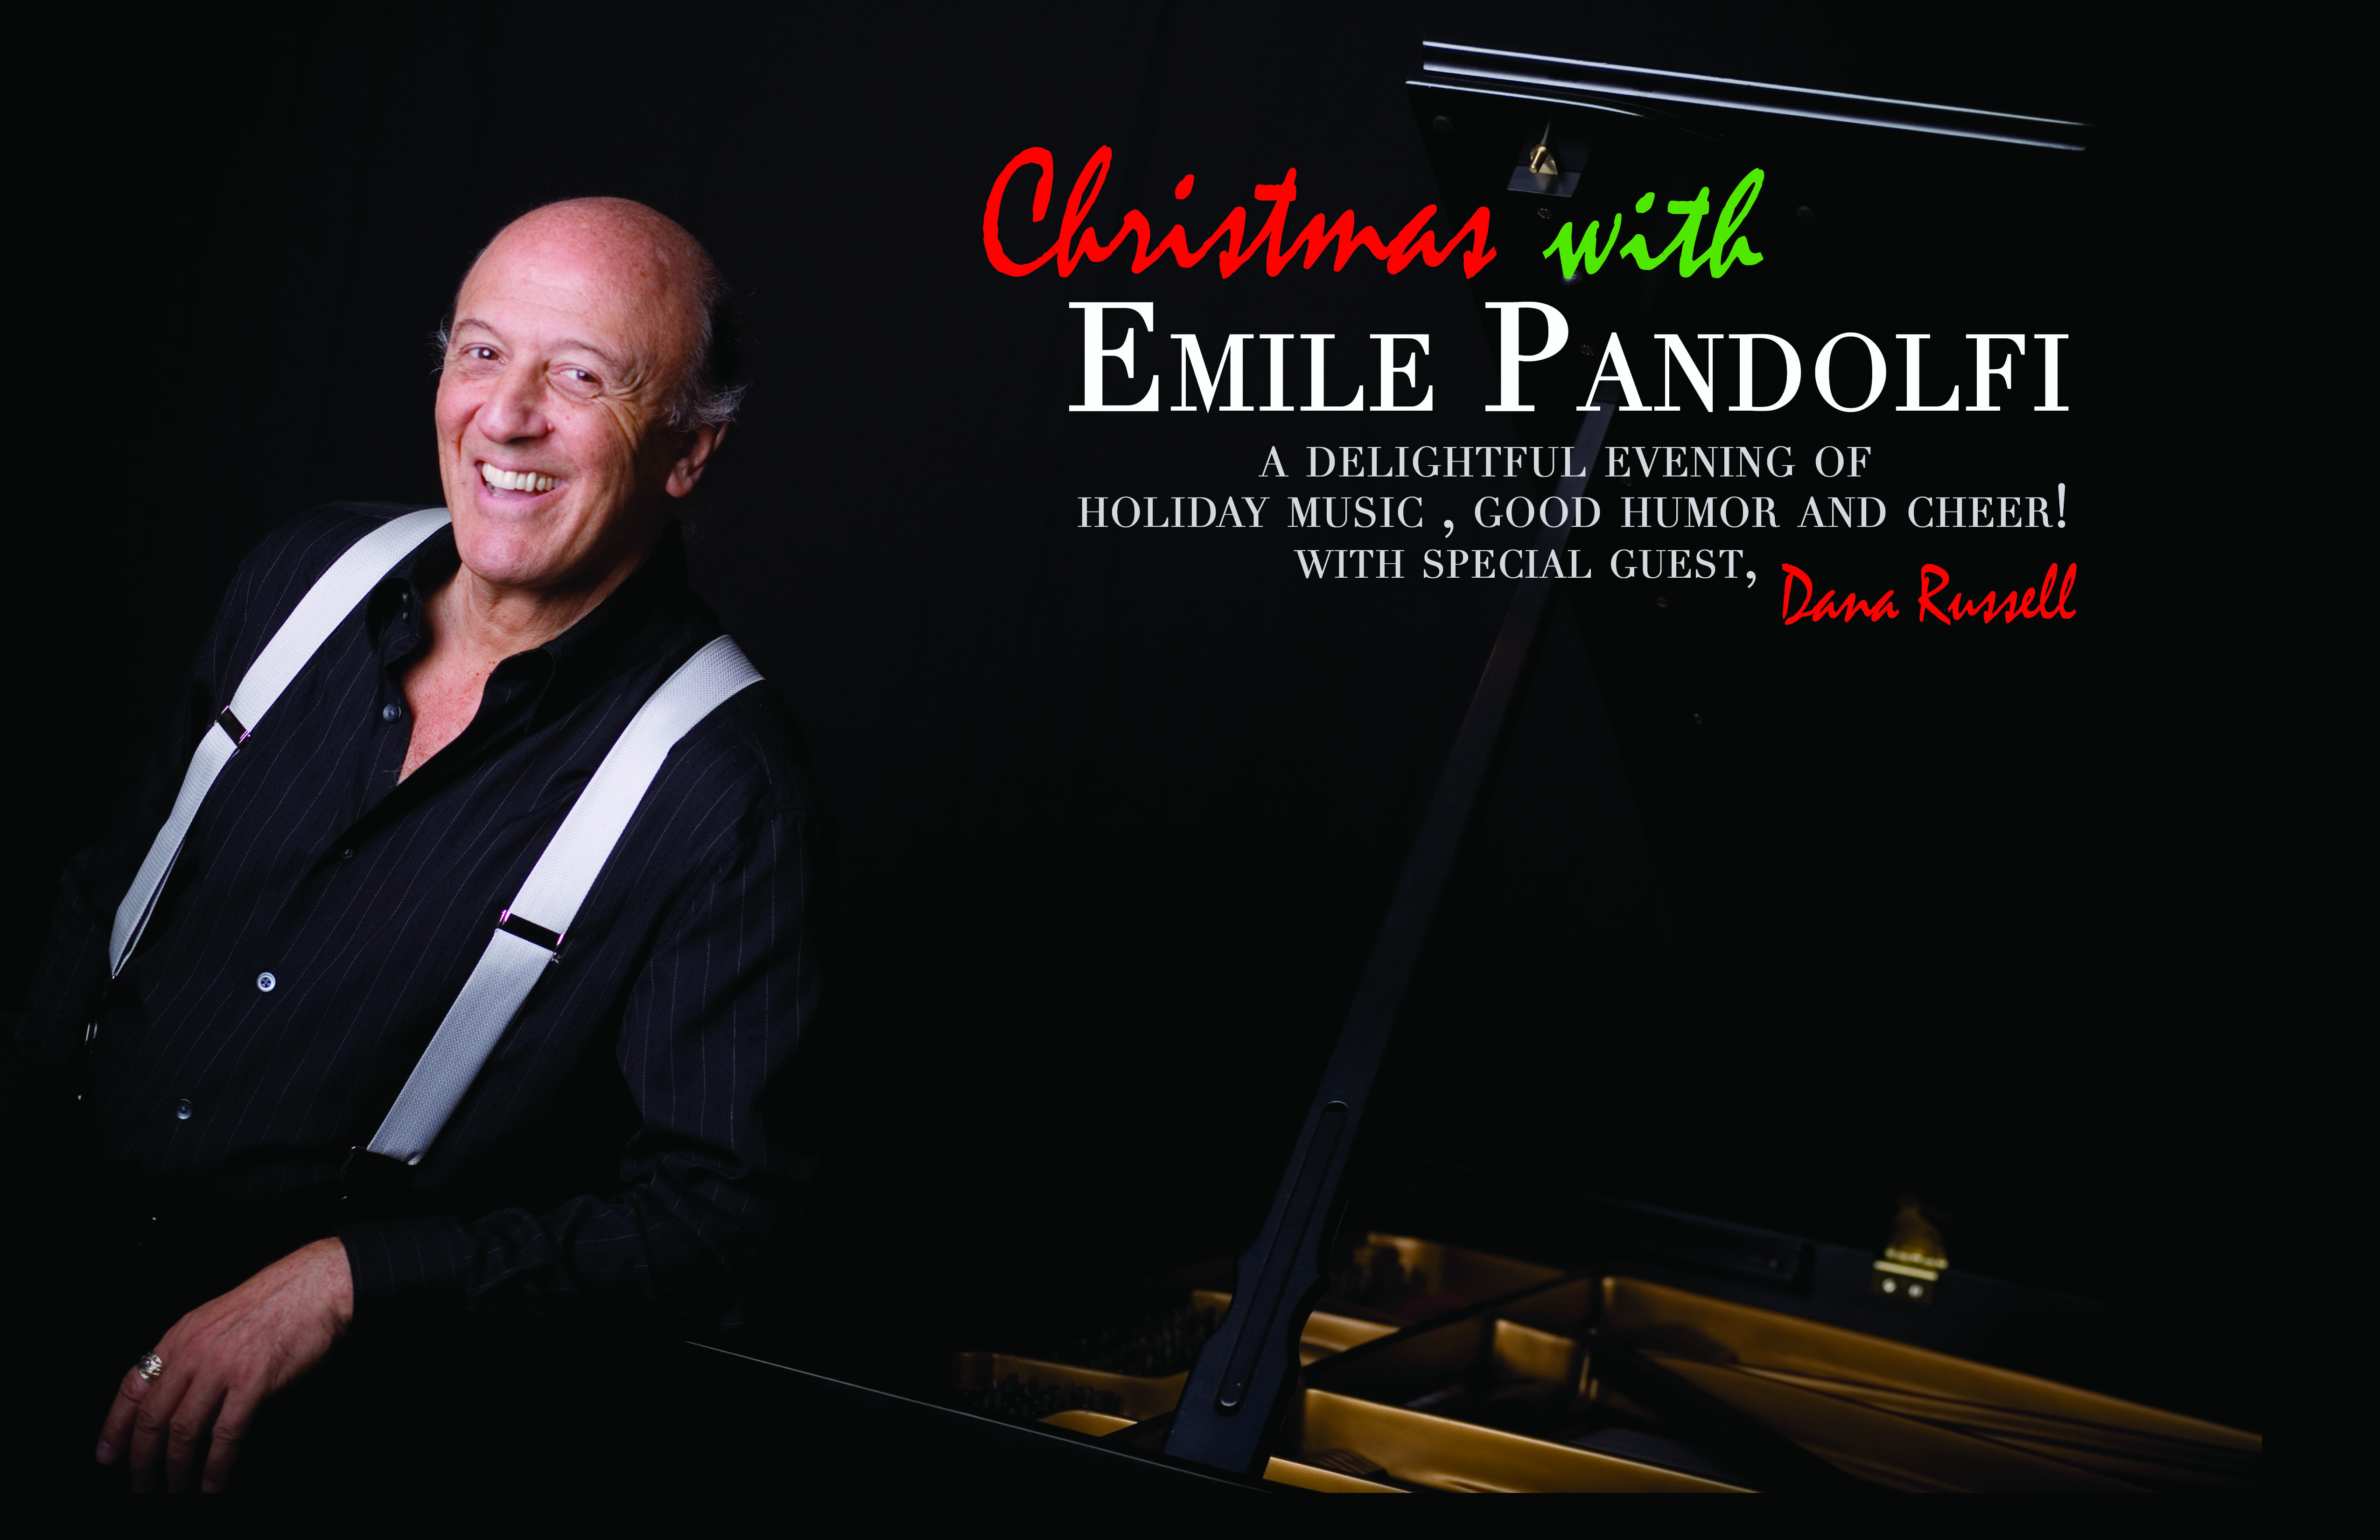 A classically trained pianist, Emile Pandolfi returns for a third time to the Cole Auditorium on Dec. 16 for a special holiday show.